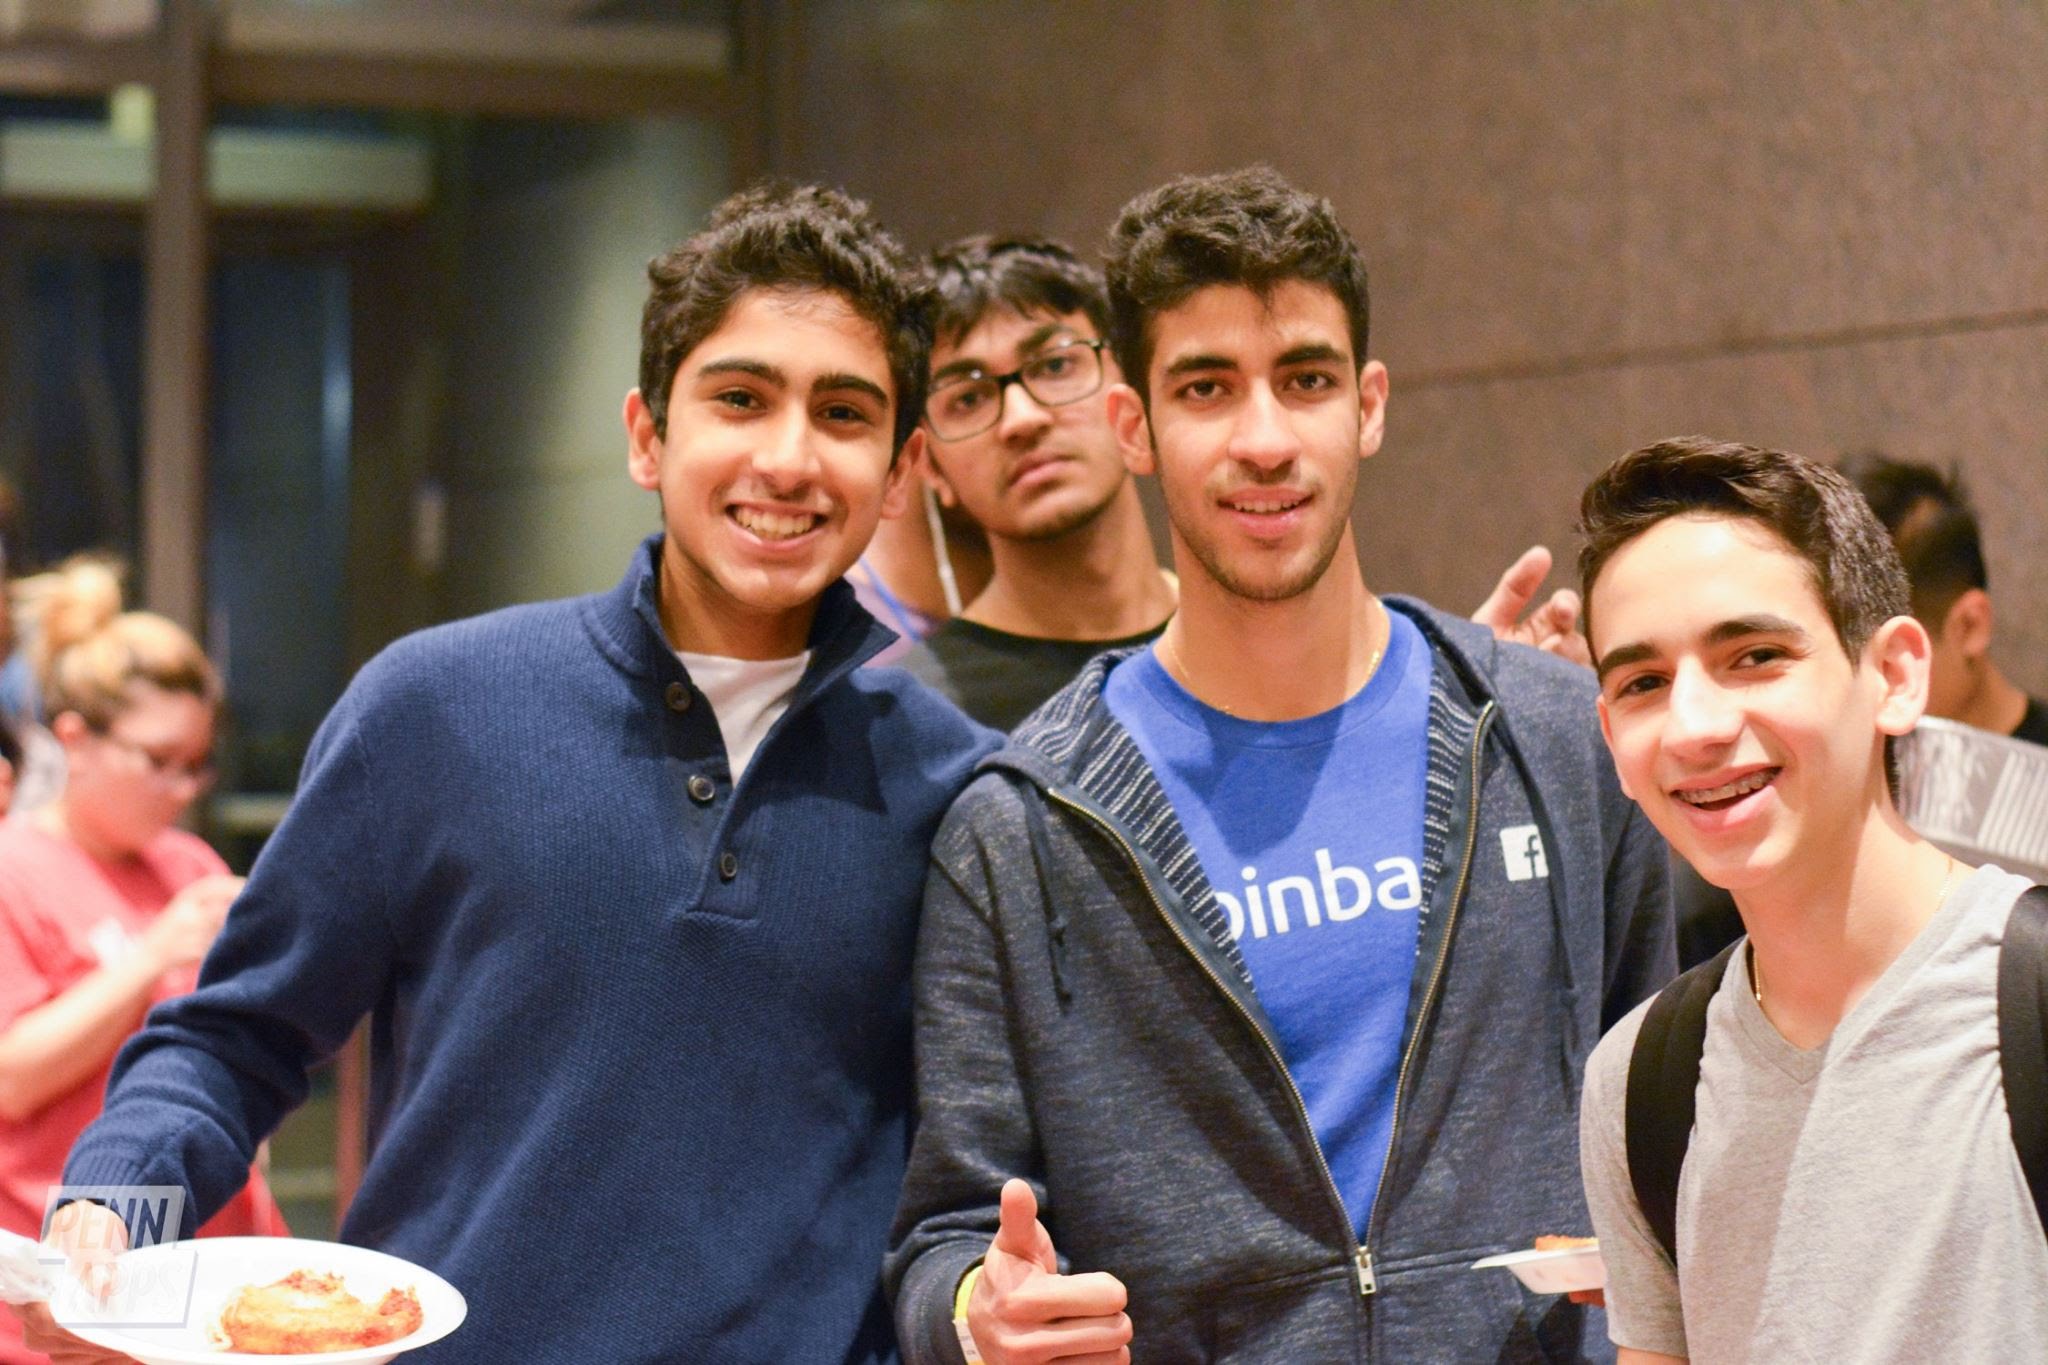 Friends @ PennApps